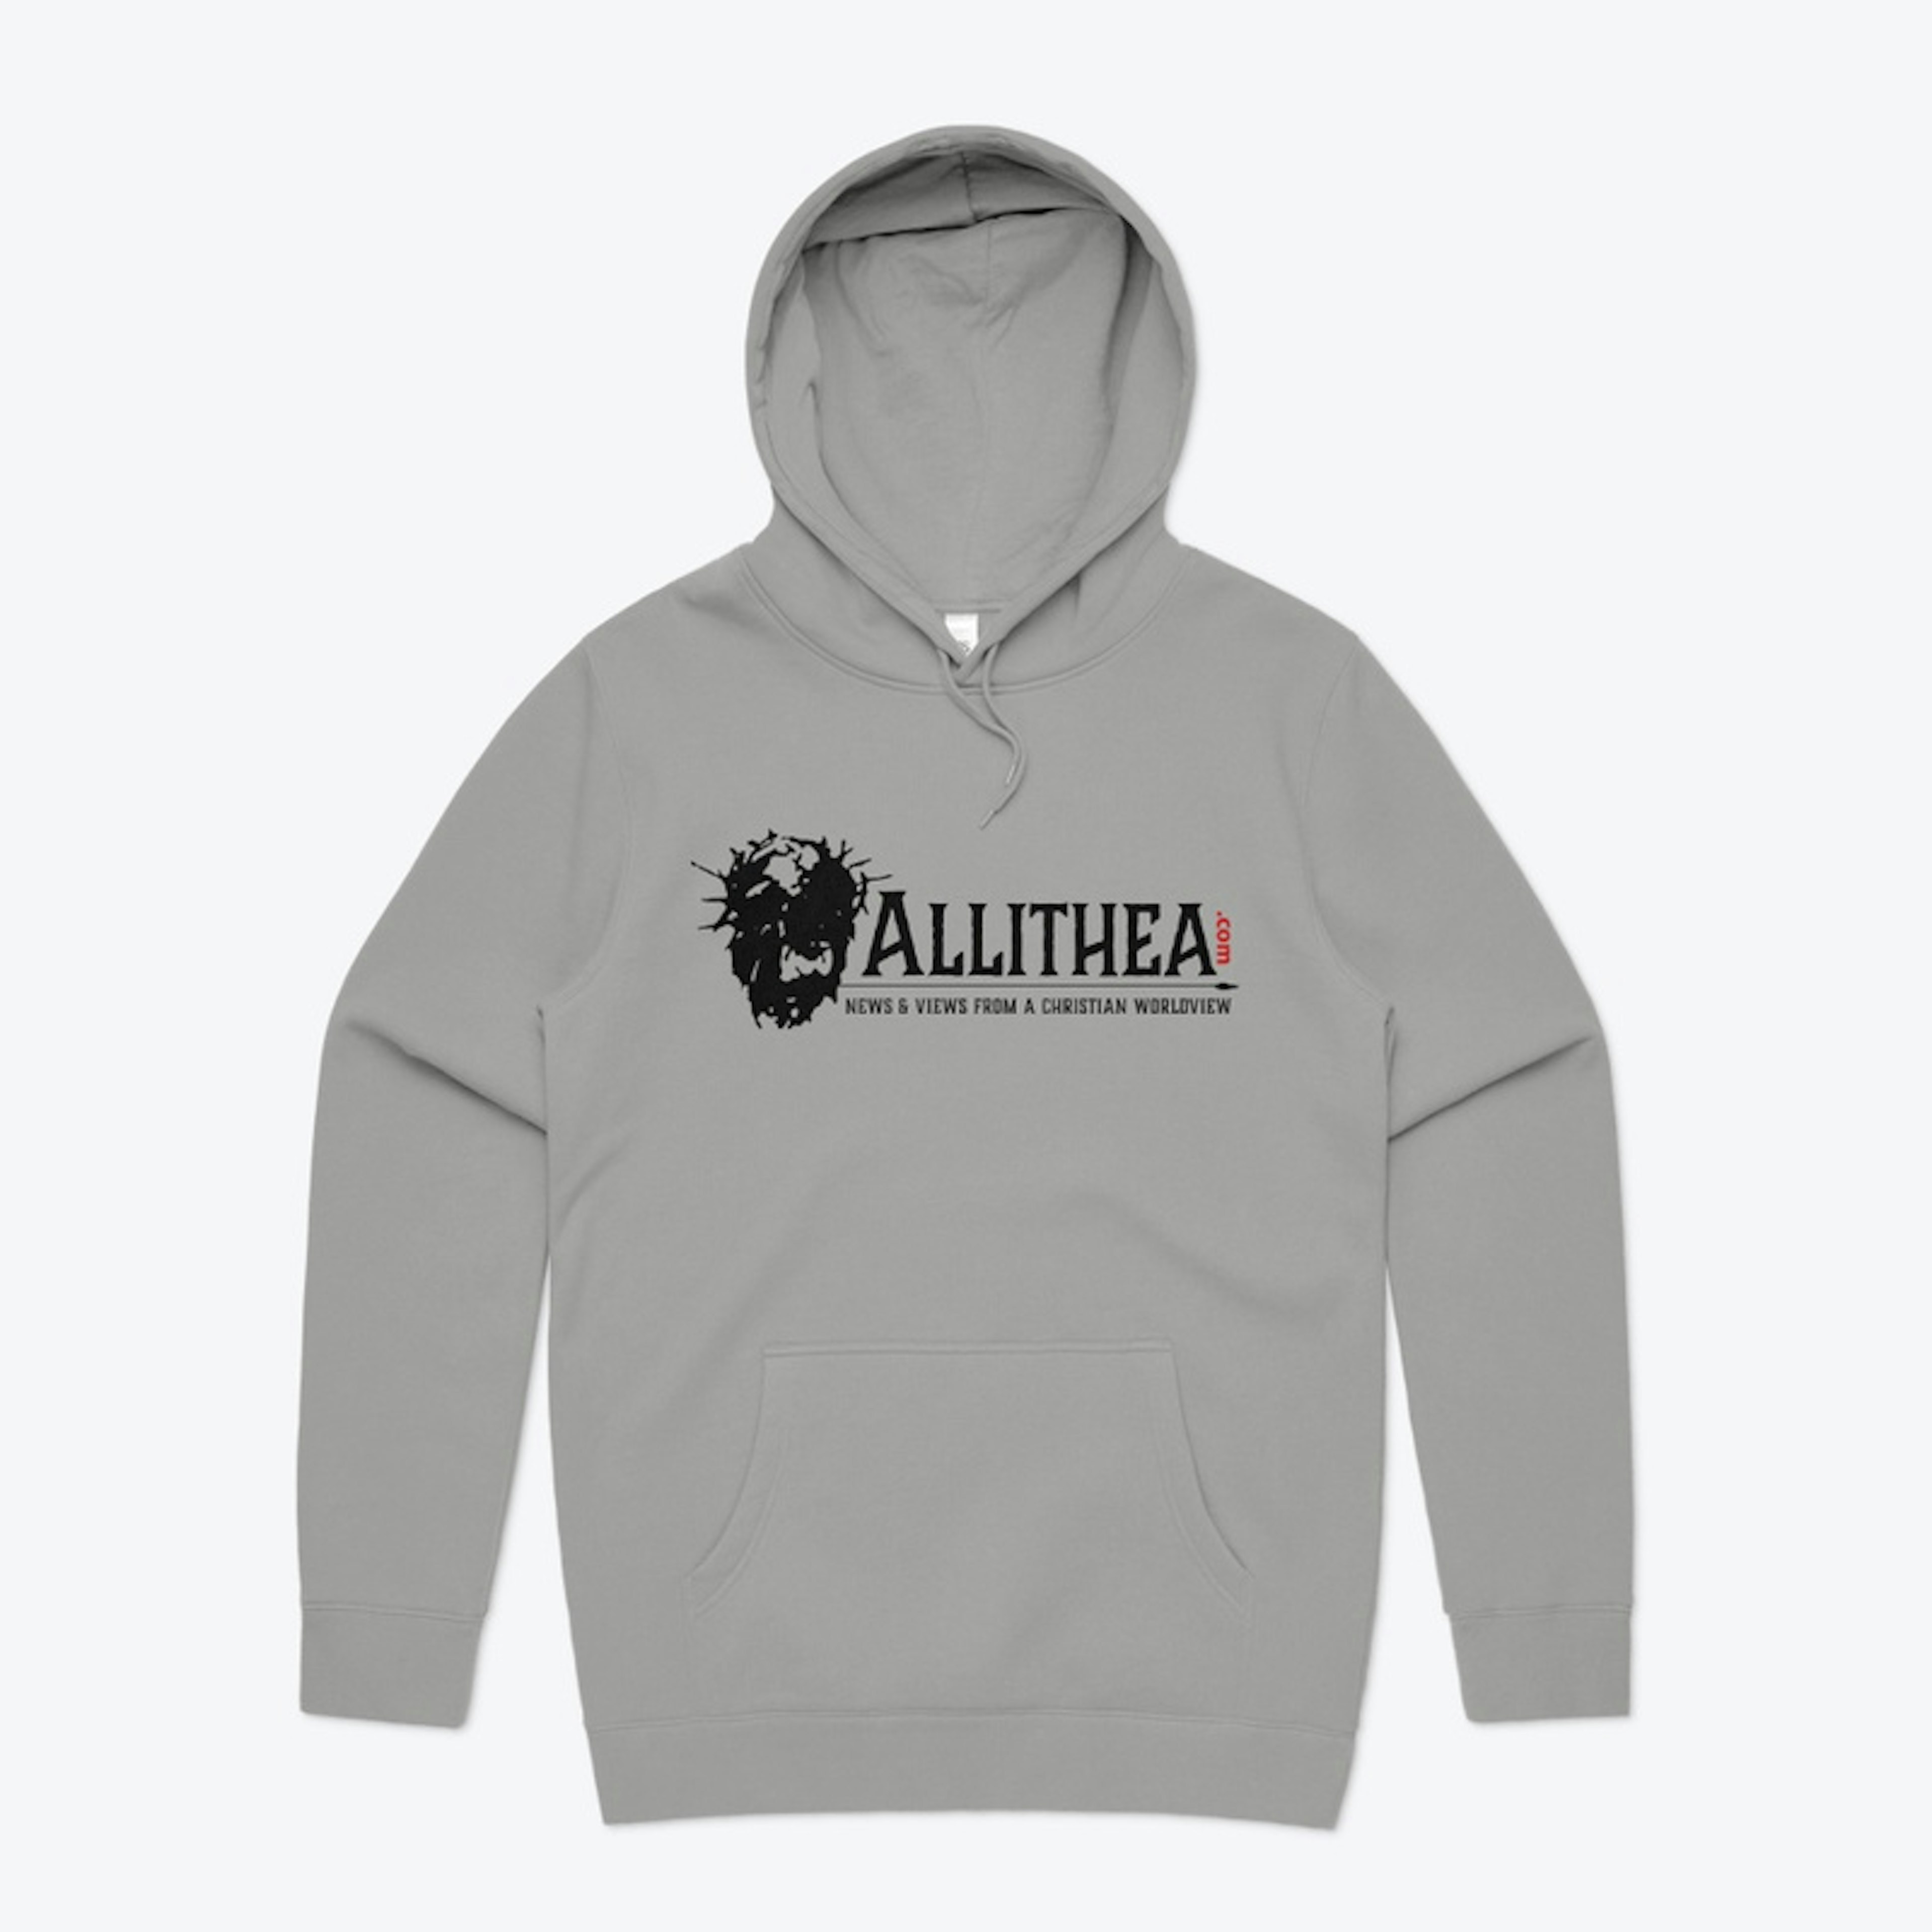 Allithea - Ancient Greek for "Truth"